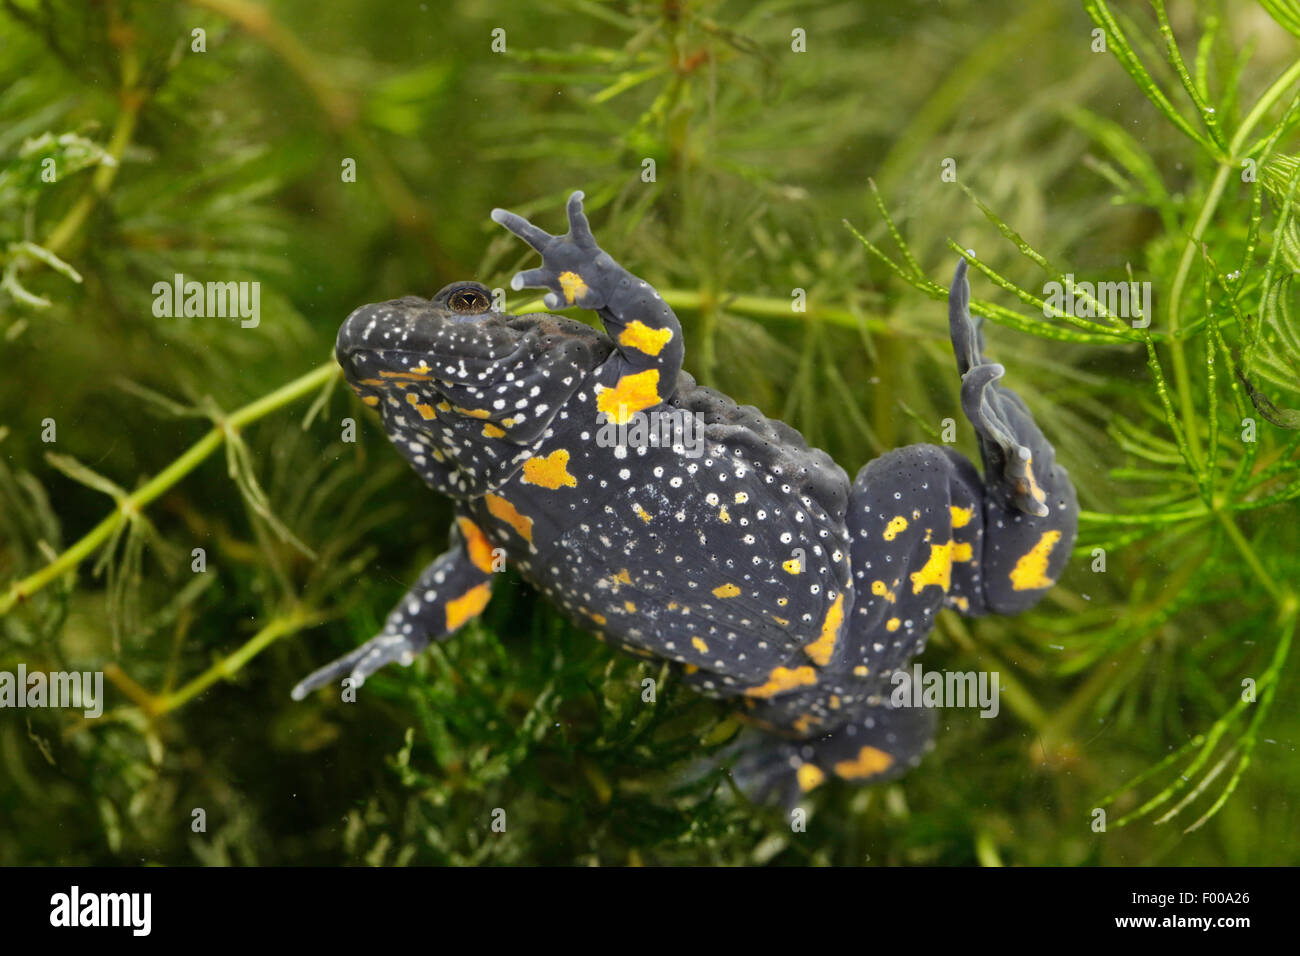 fire-bellied toad (Bombina bombina), fire-bellied toad swimming through Mouse-ear chickweed, Germany, Bavaria Stock Photo